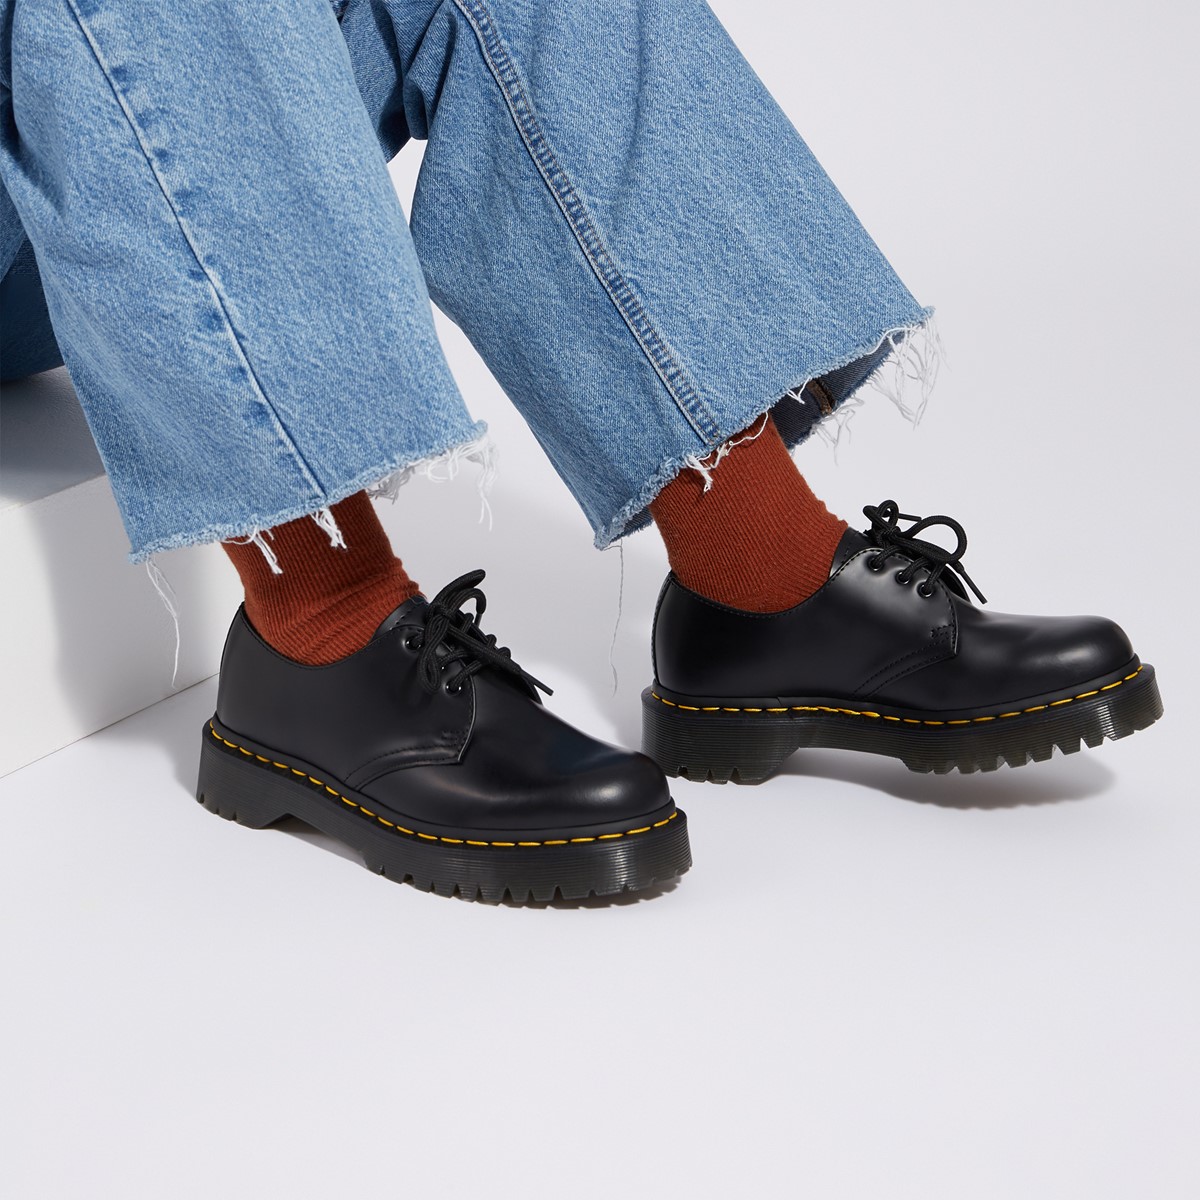 DR MARTENS 1461 Bex Smooth Contrast Leather Oxford Shoes ...